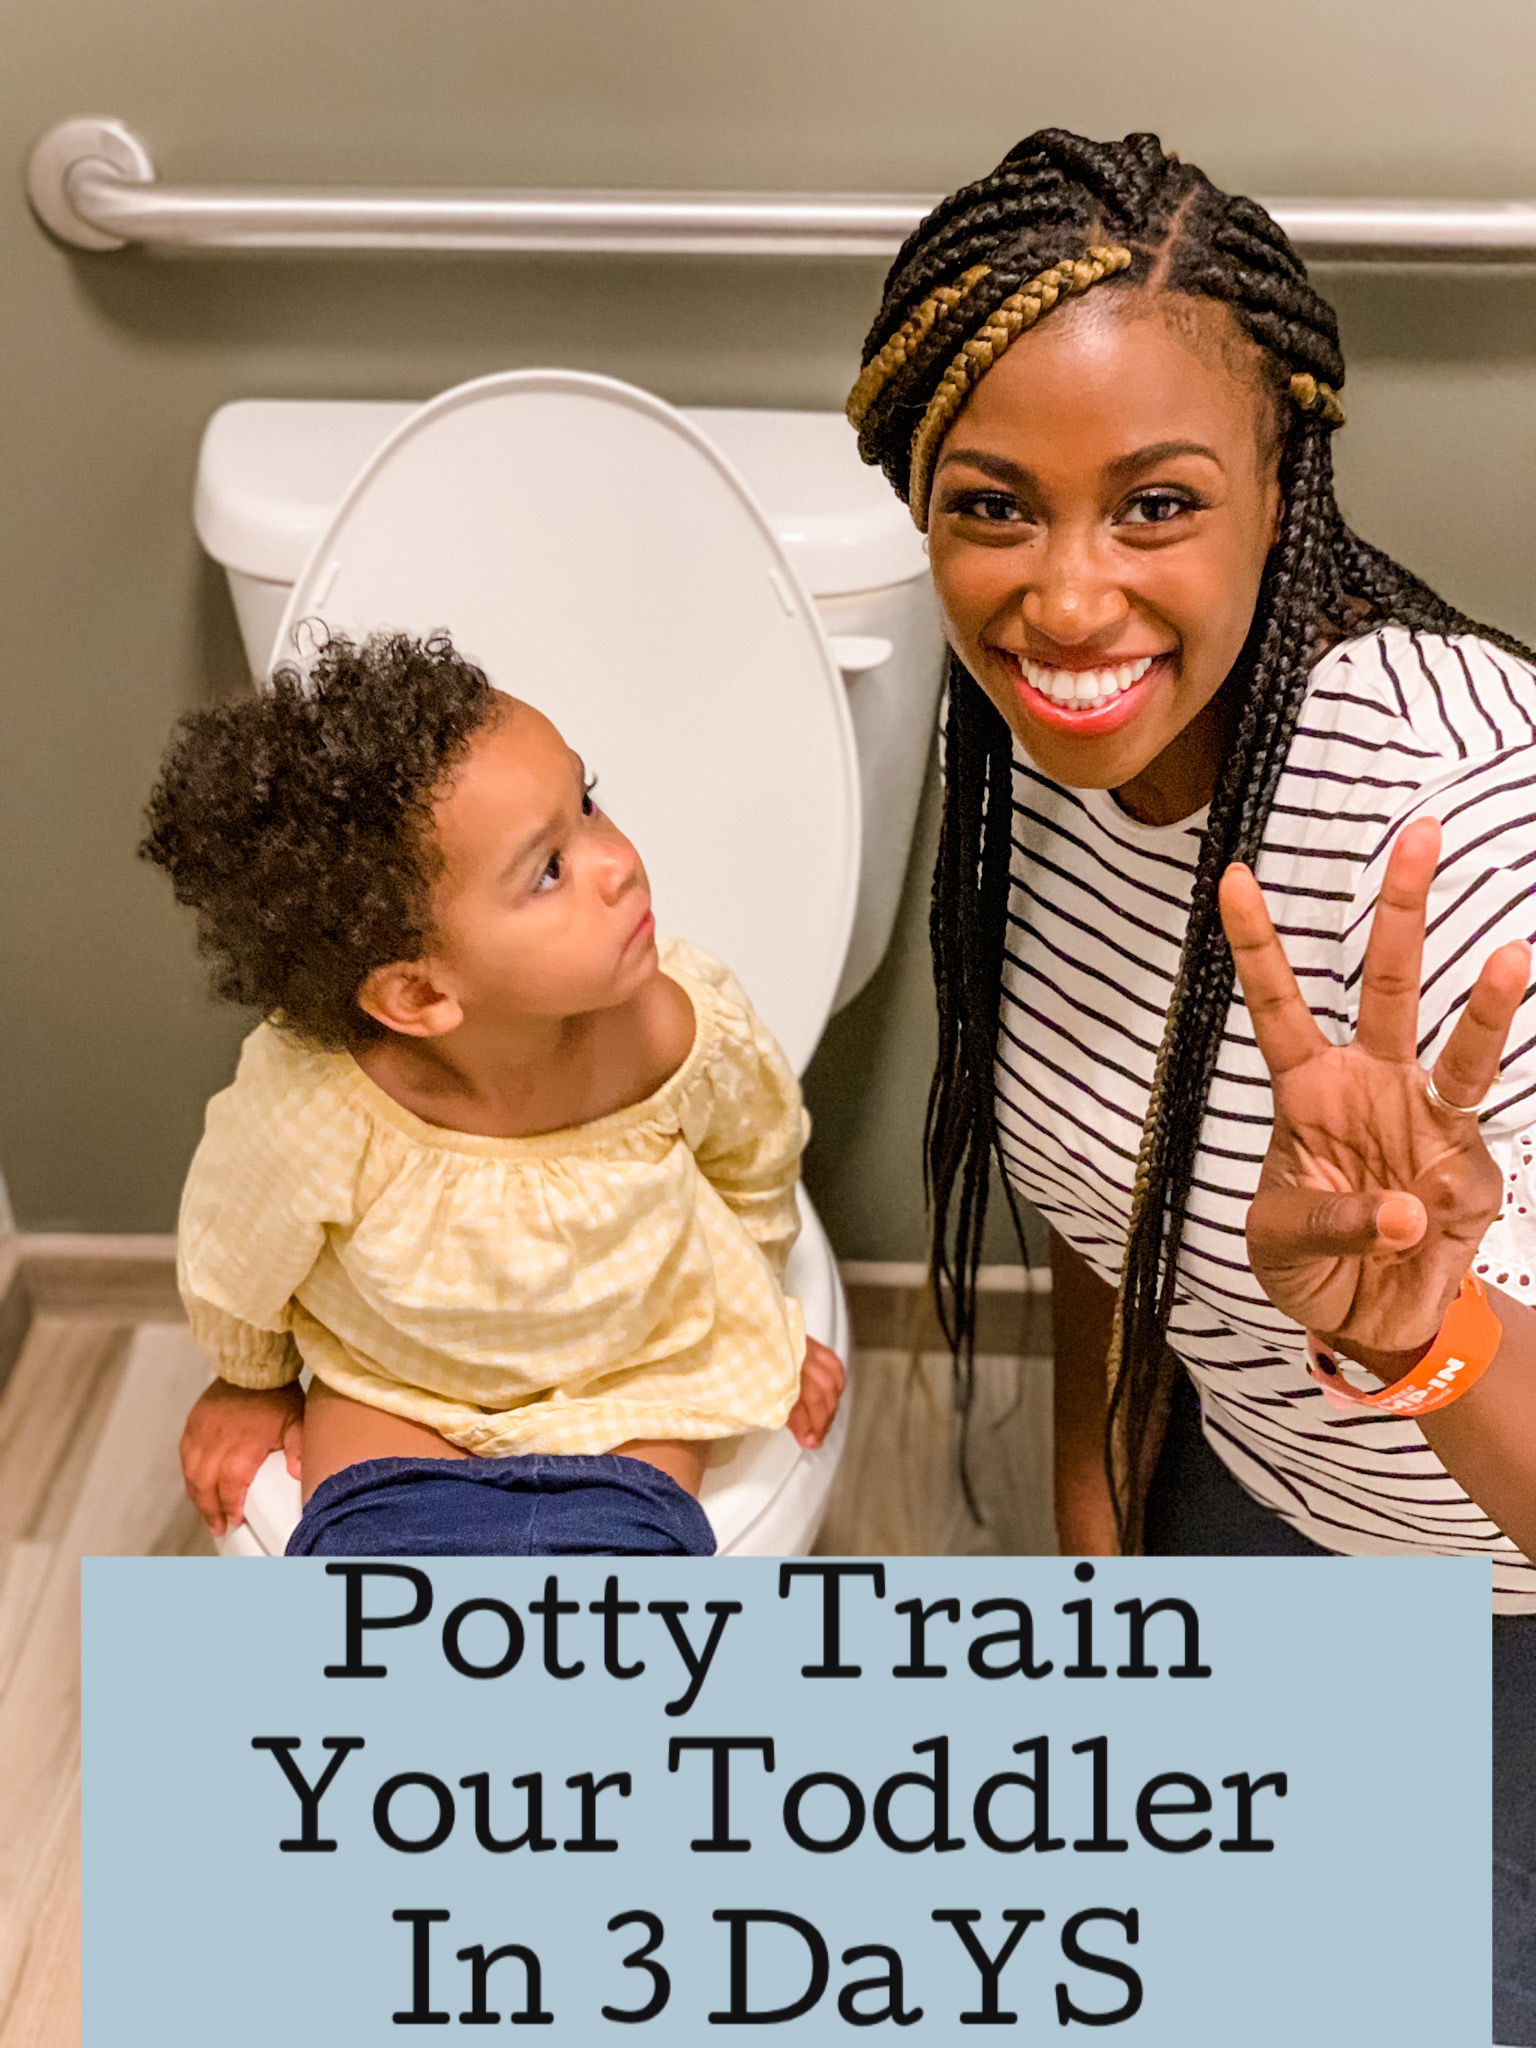 How to Potty Train Your Toddler